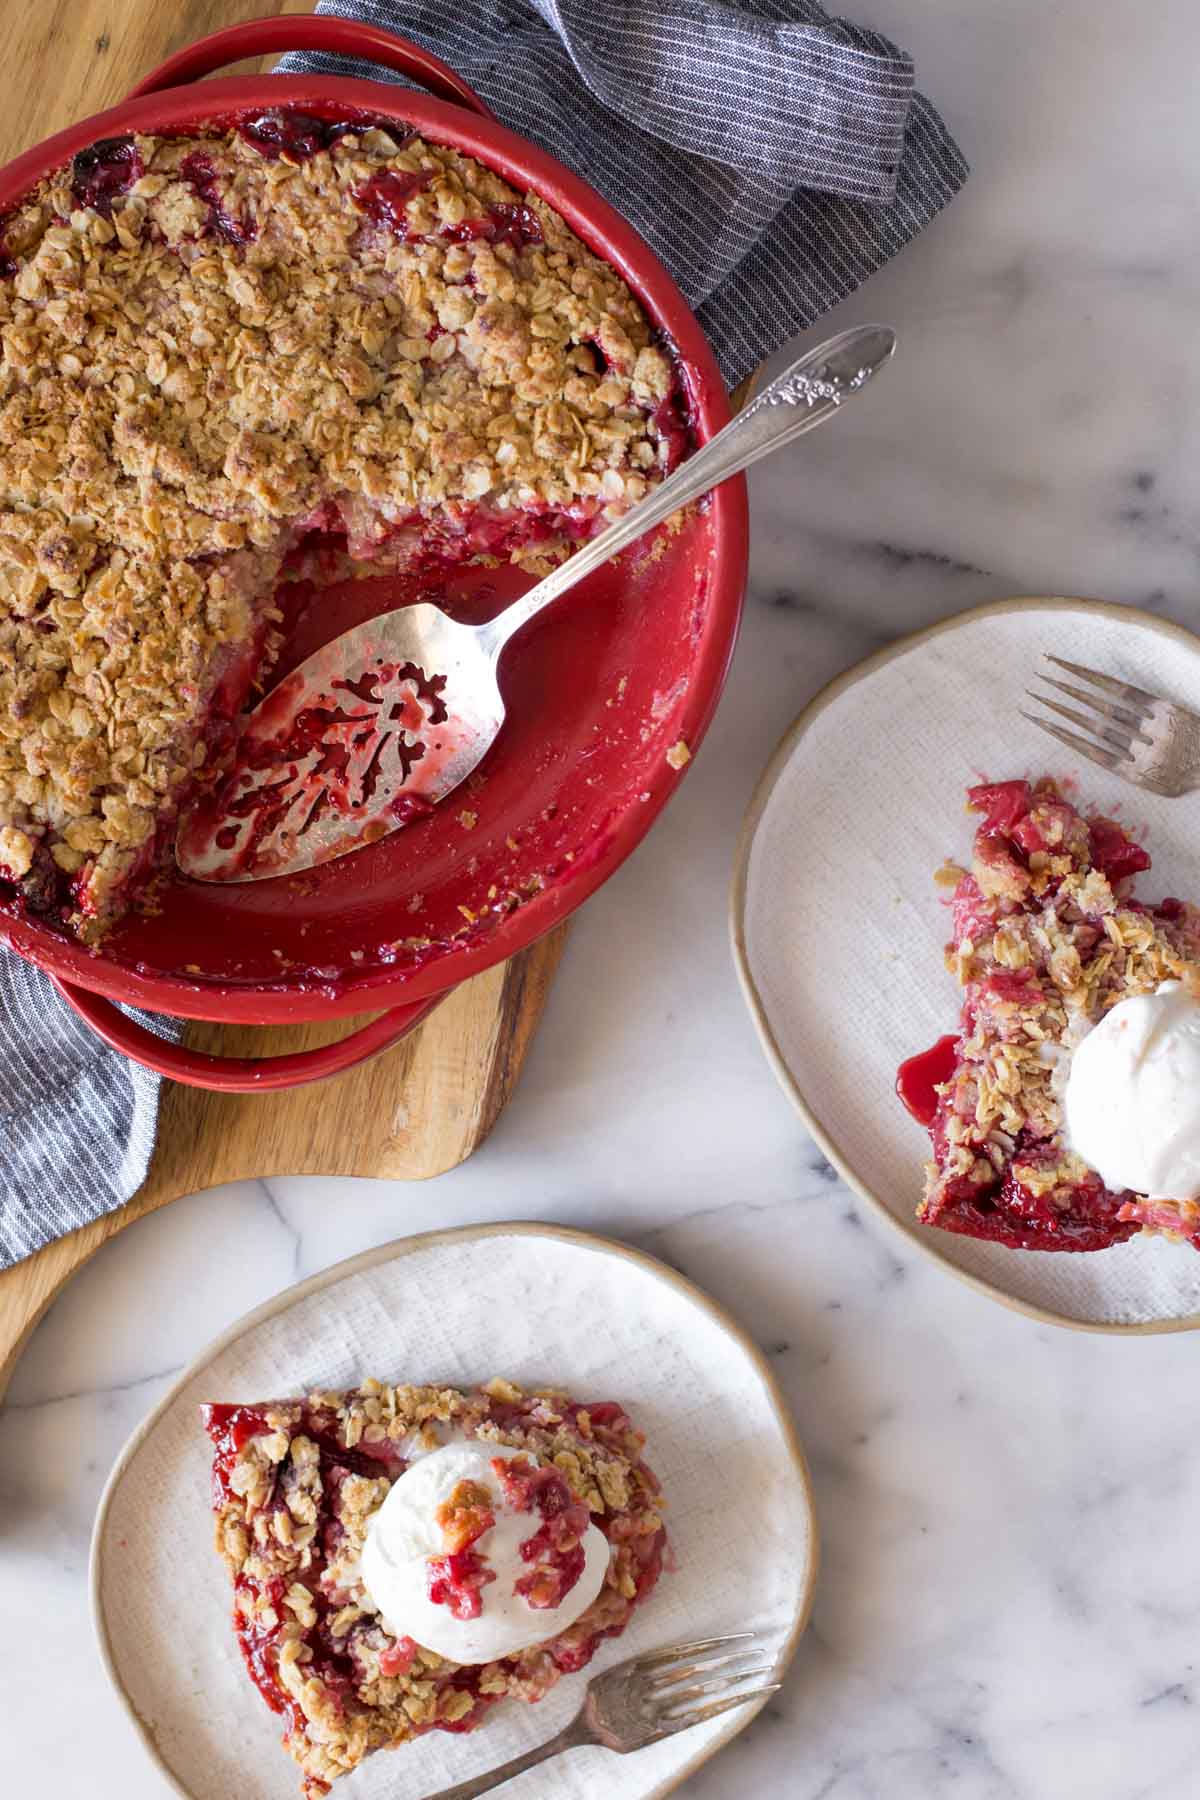 Overhead shot of Berry Crumble Pie in a pie dish with a serving utensil, sitting next to two plates with slices of Berry Crumble Pie each topped with a scoop of vanilla ice cream.  